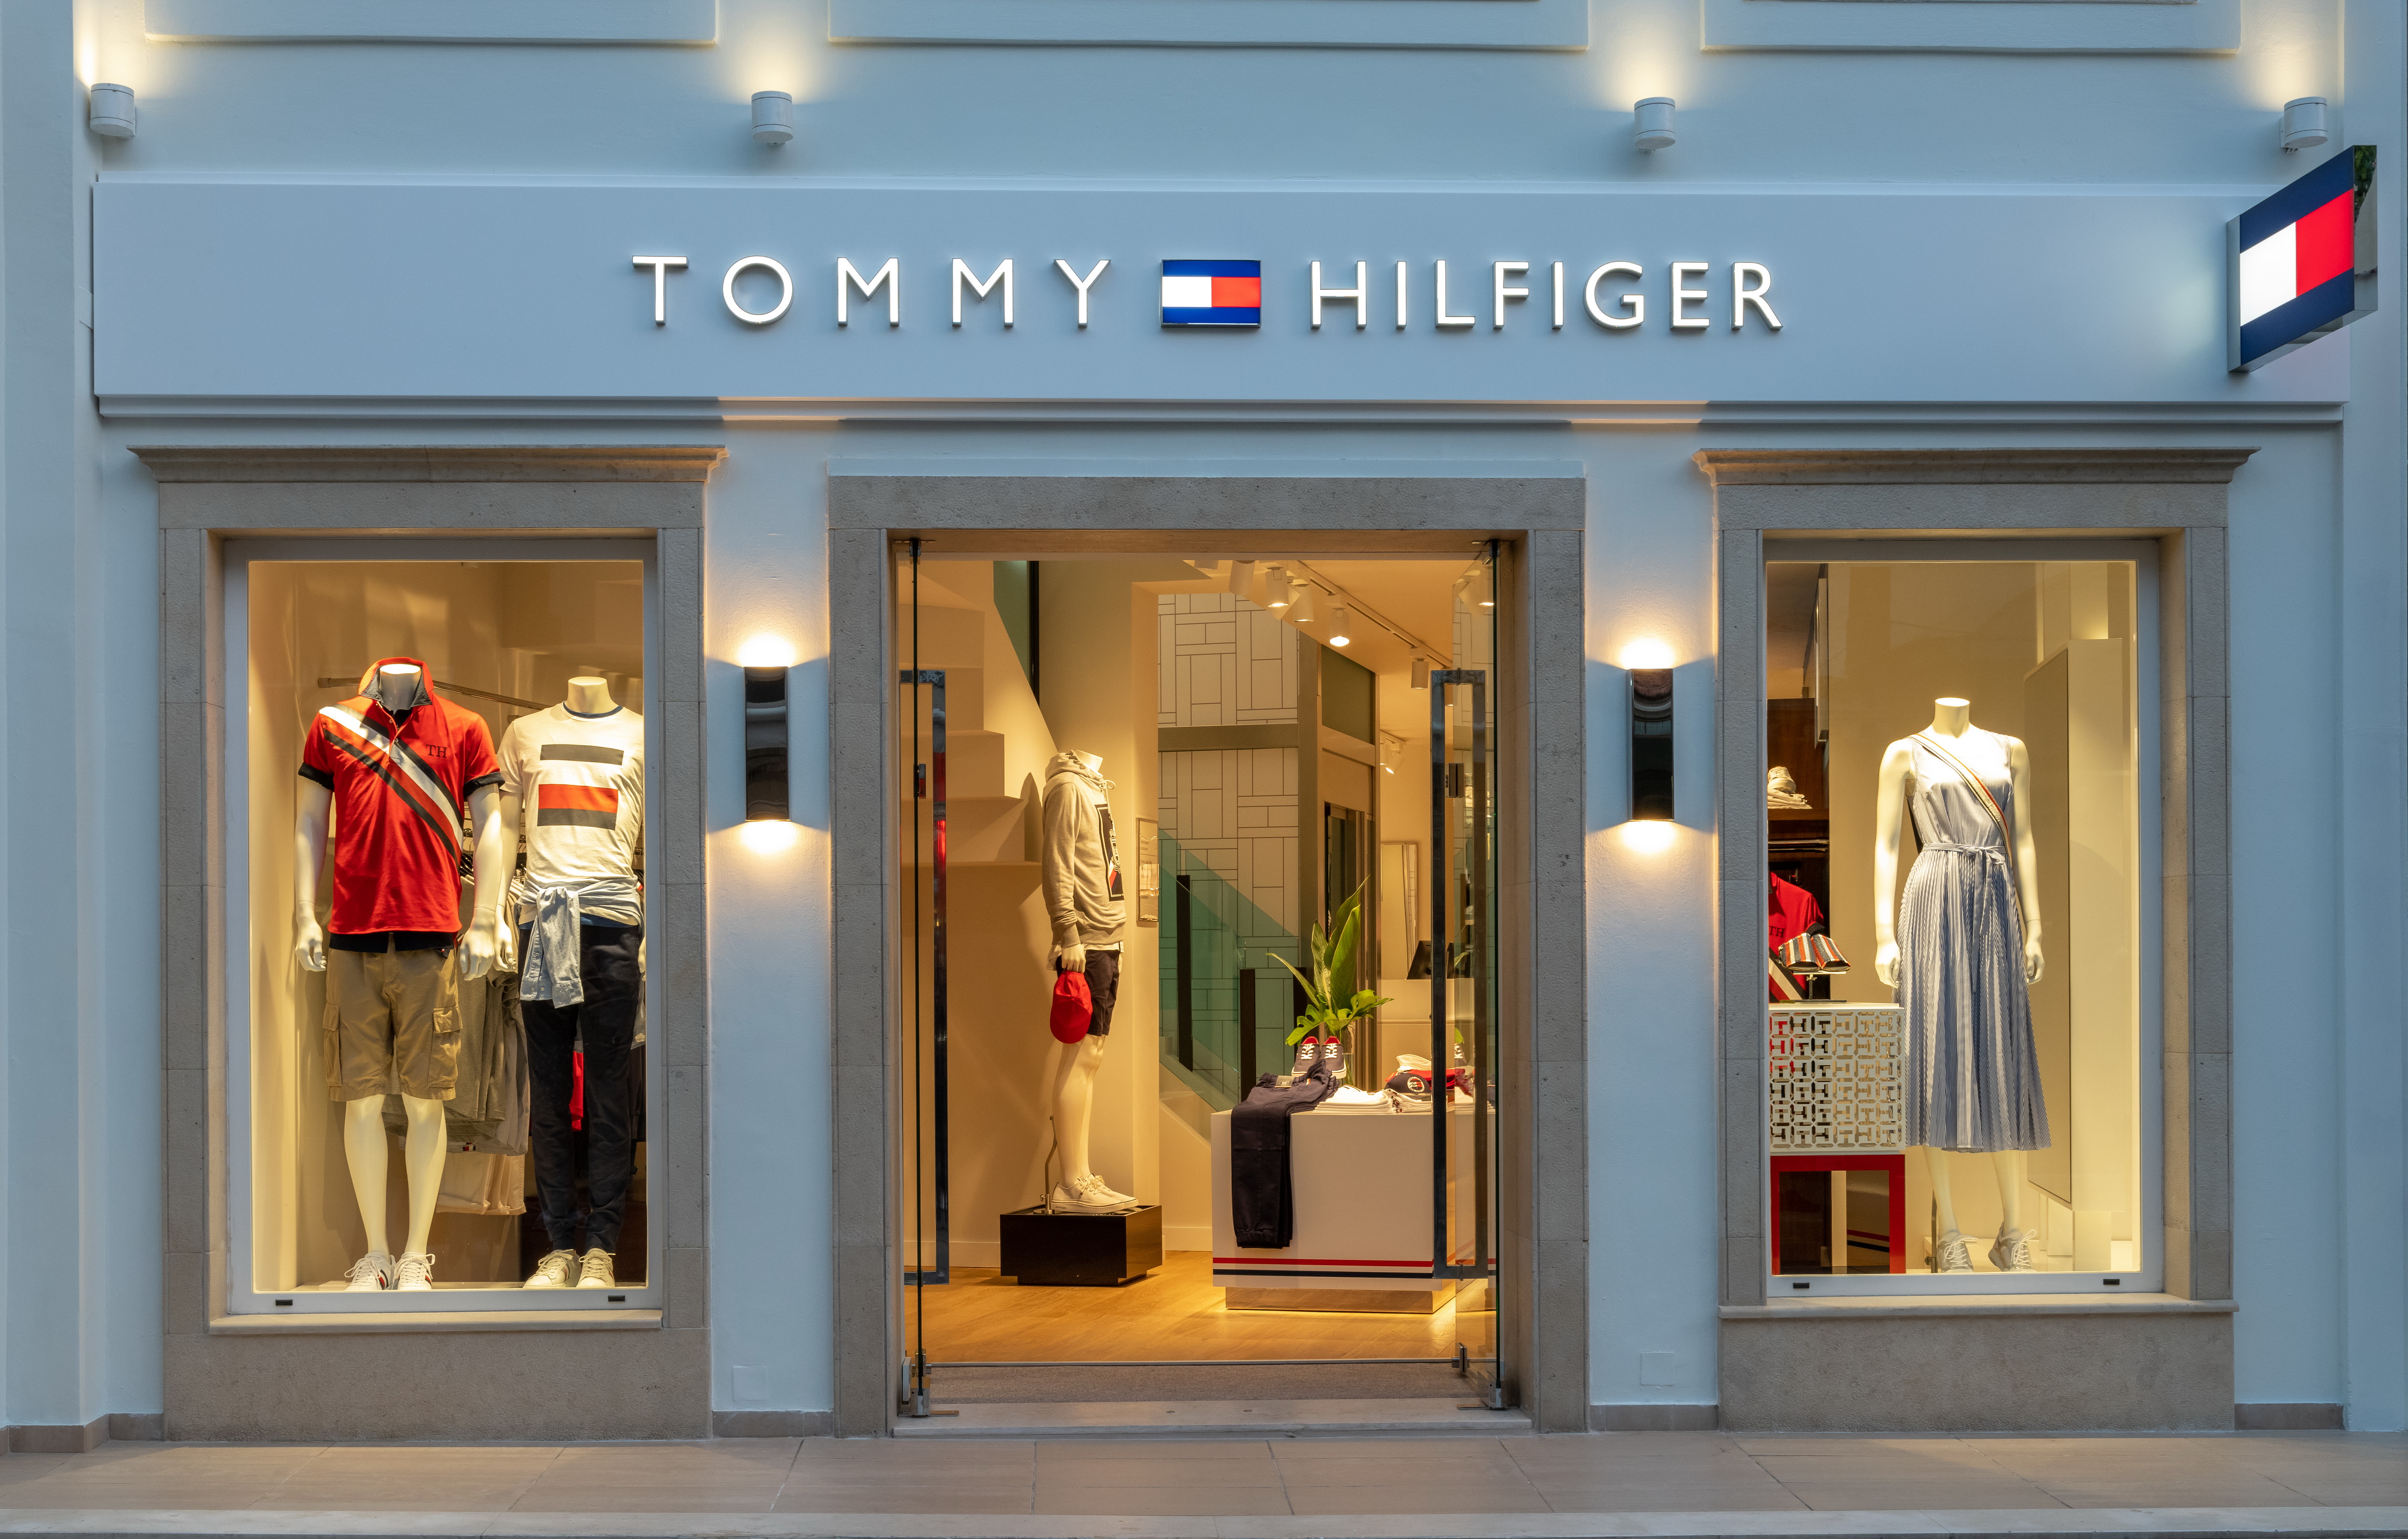 pvd-concept-projects-nona_simply-Tommy Hilfiger Heraklion (GR)-image-02.jpg